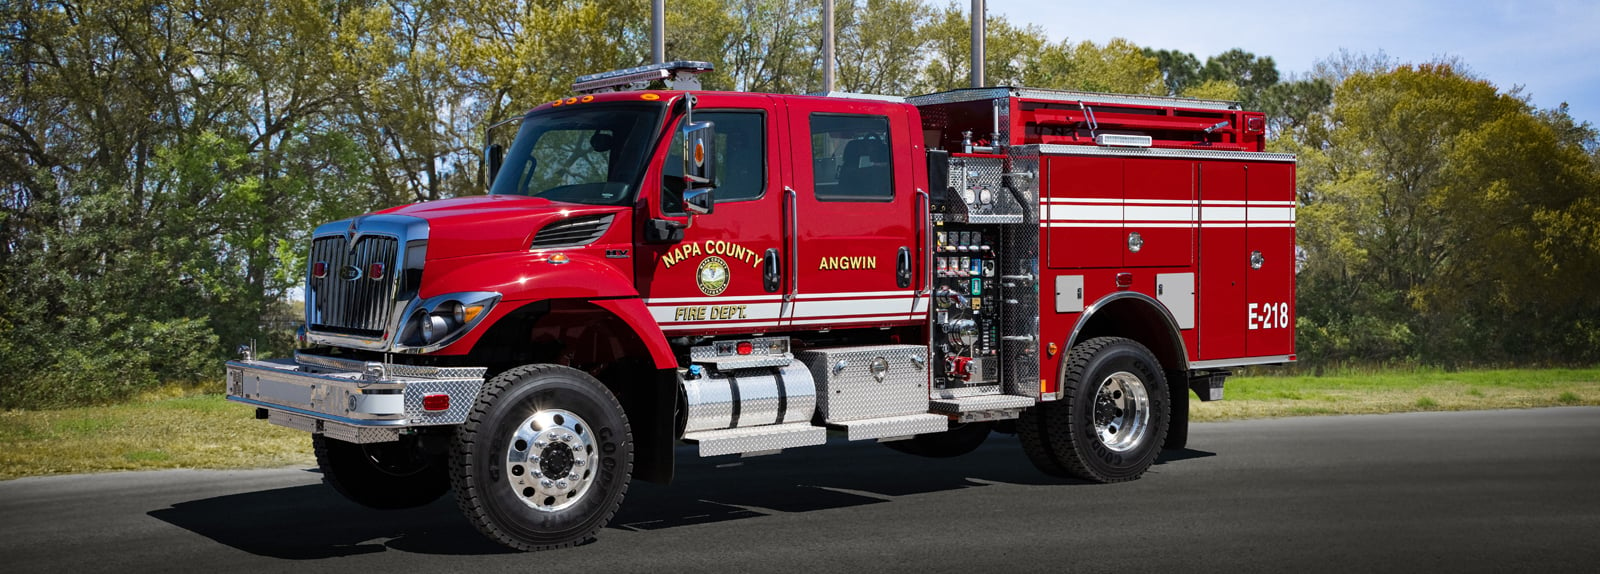 Types of Fire Trucks: An Overview and Comparison